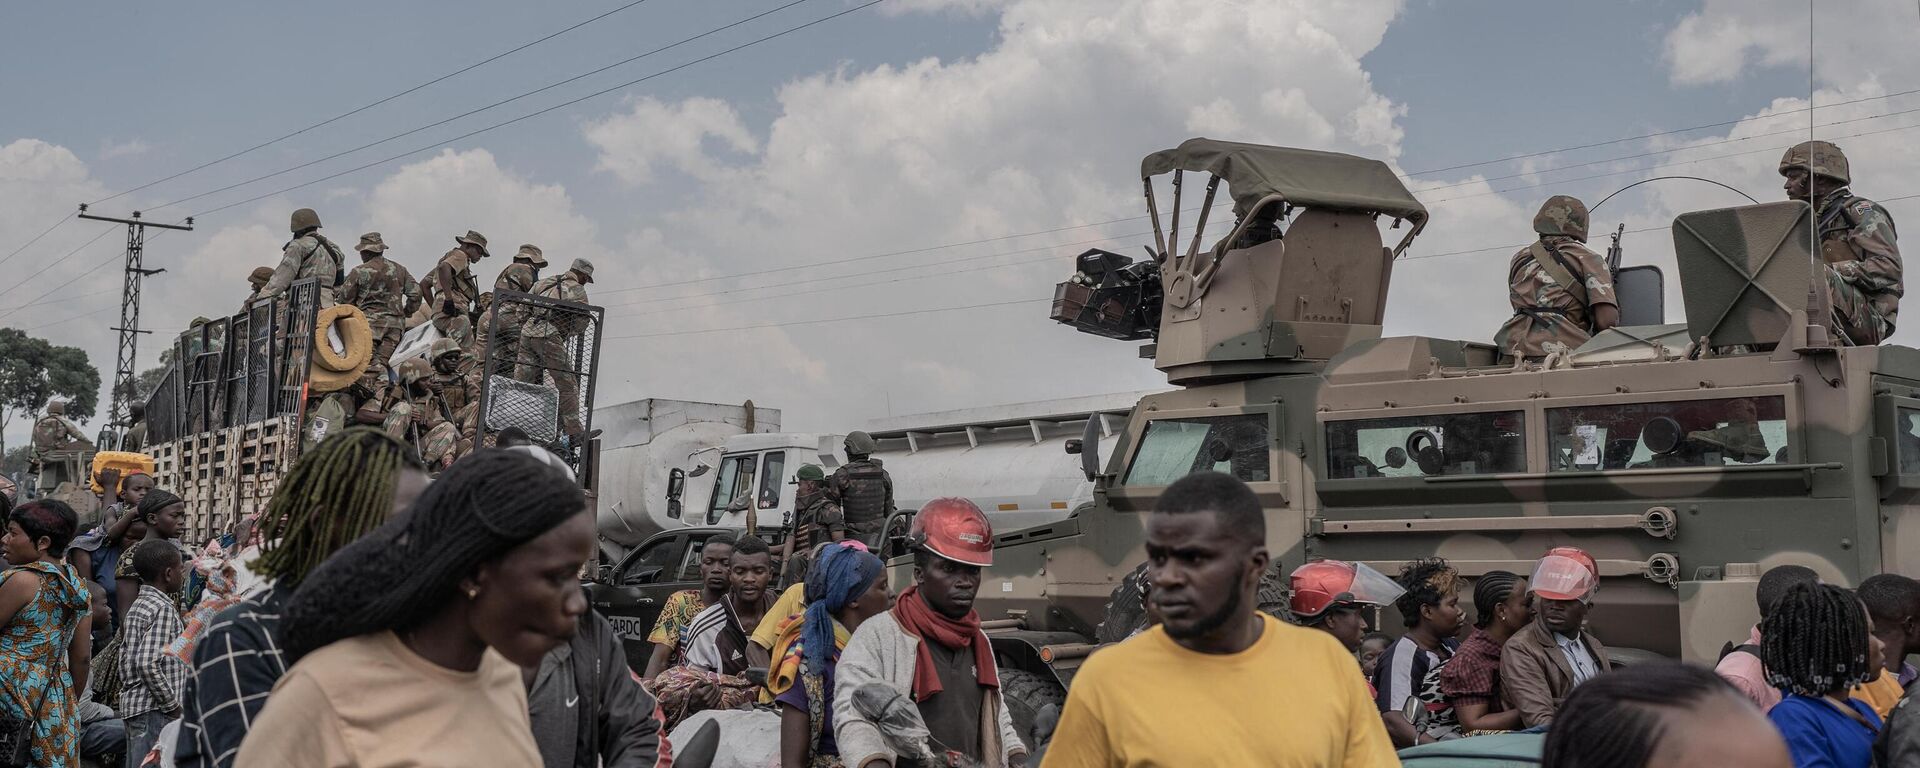  People gather next to some vehicles from the South African National Defence Force (SANDF) as part of the Southern African Development Community (SADC) Mission as they flee the Masisi territory following clashes between M23 rebels and government forces, at a road near Sake on February 7, 2024. - Sputnik Africa, 1920, 22.02.2024